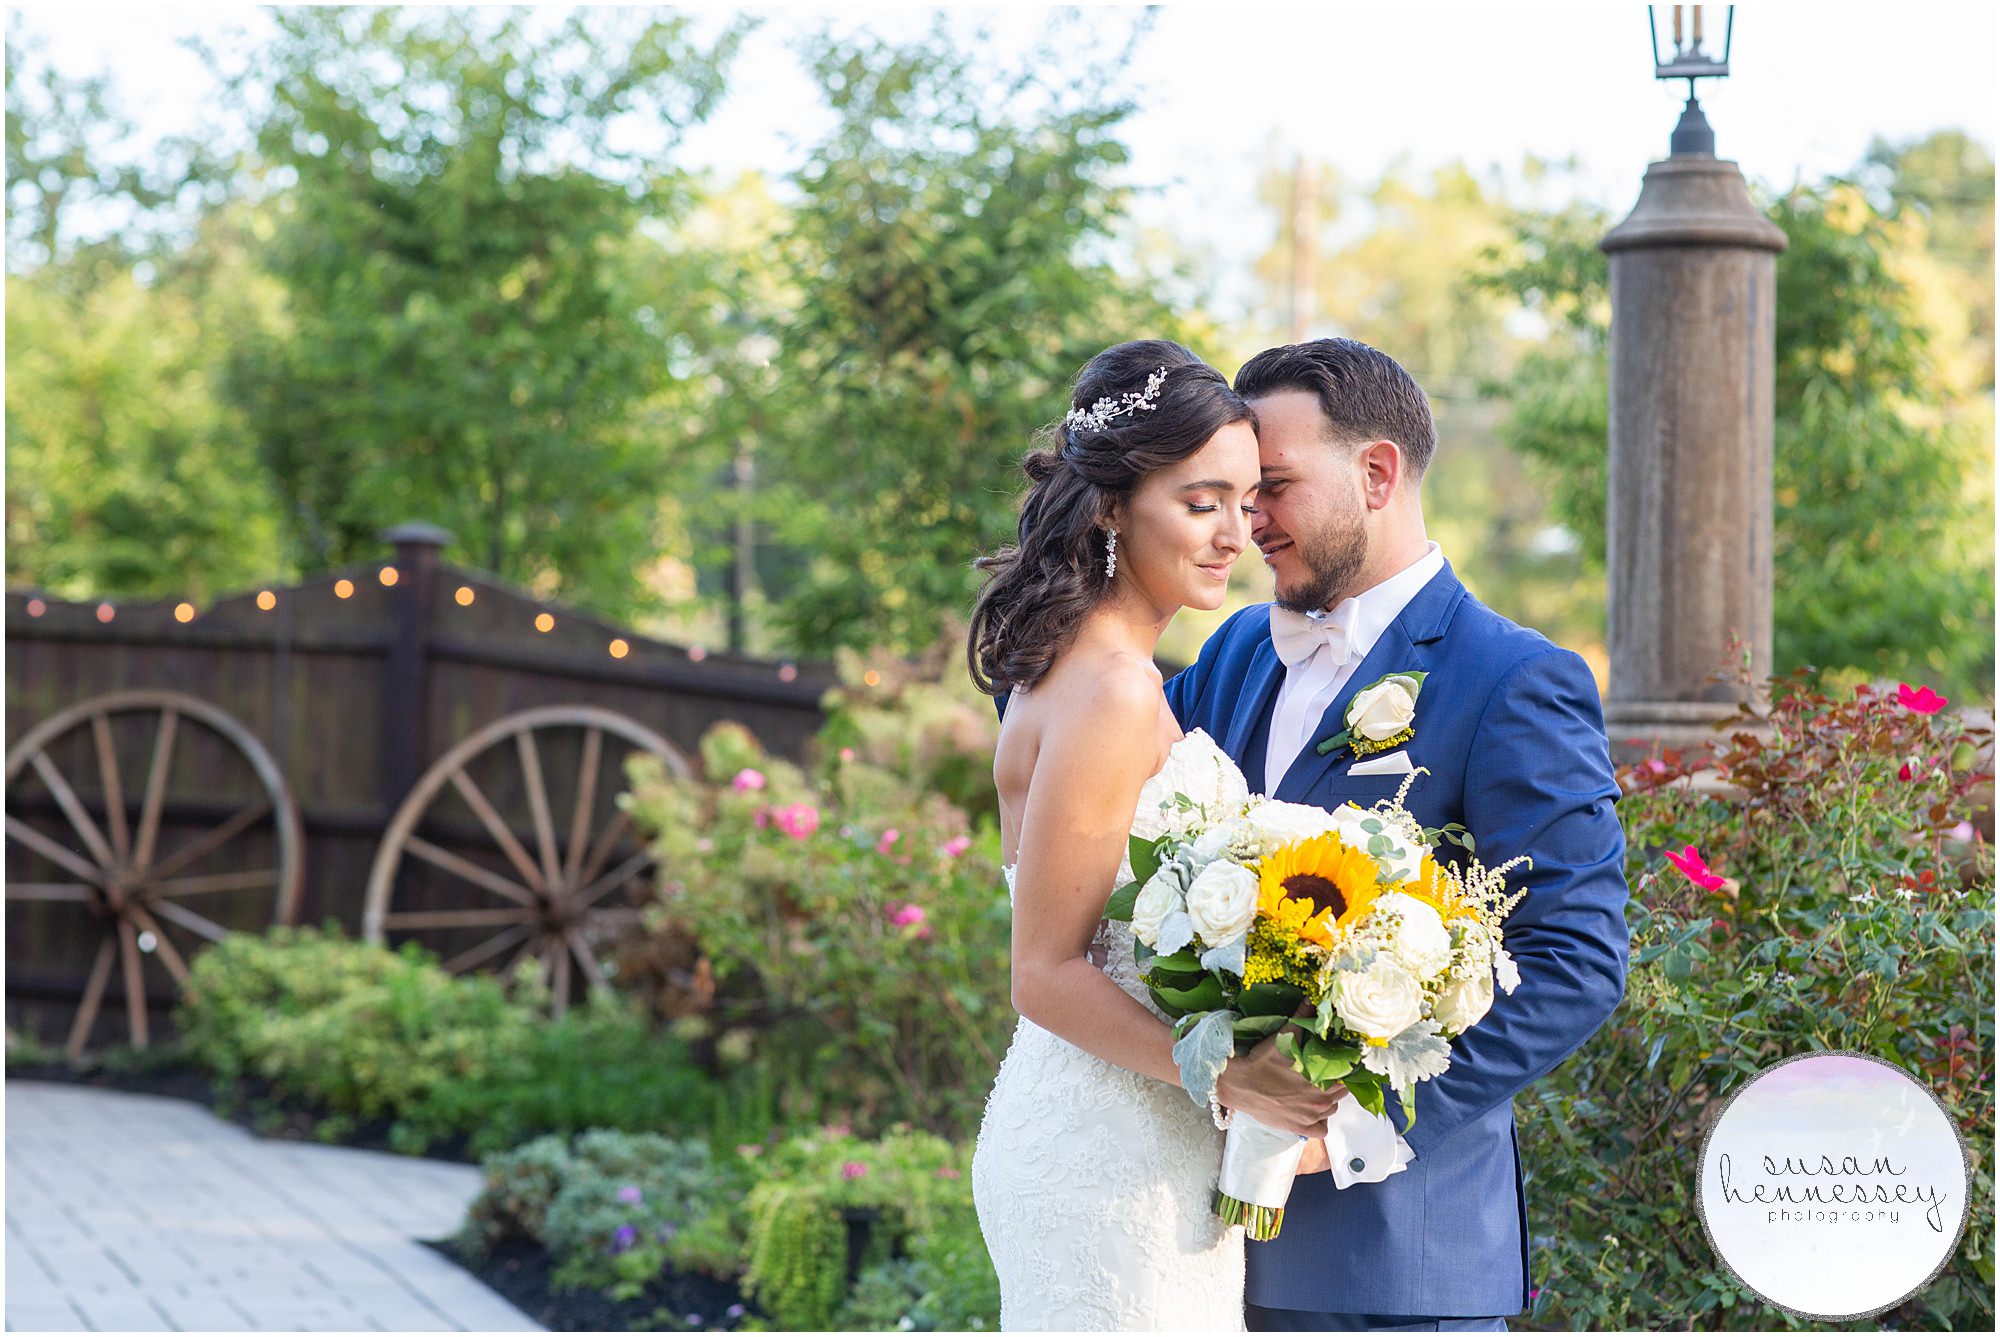 Rustic wedding portraits in Central Jersey